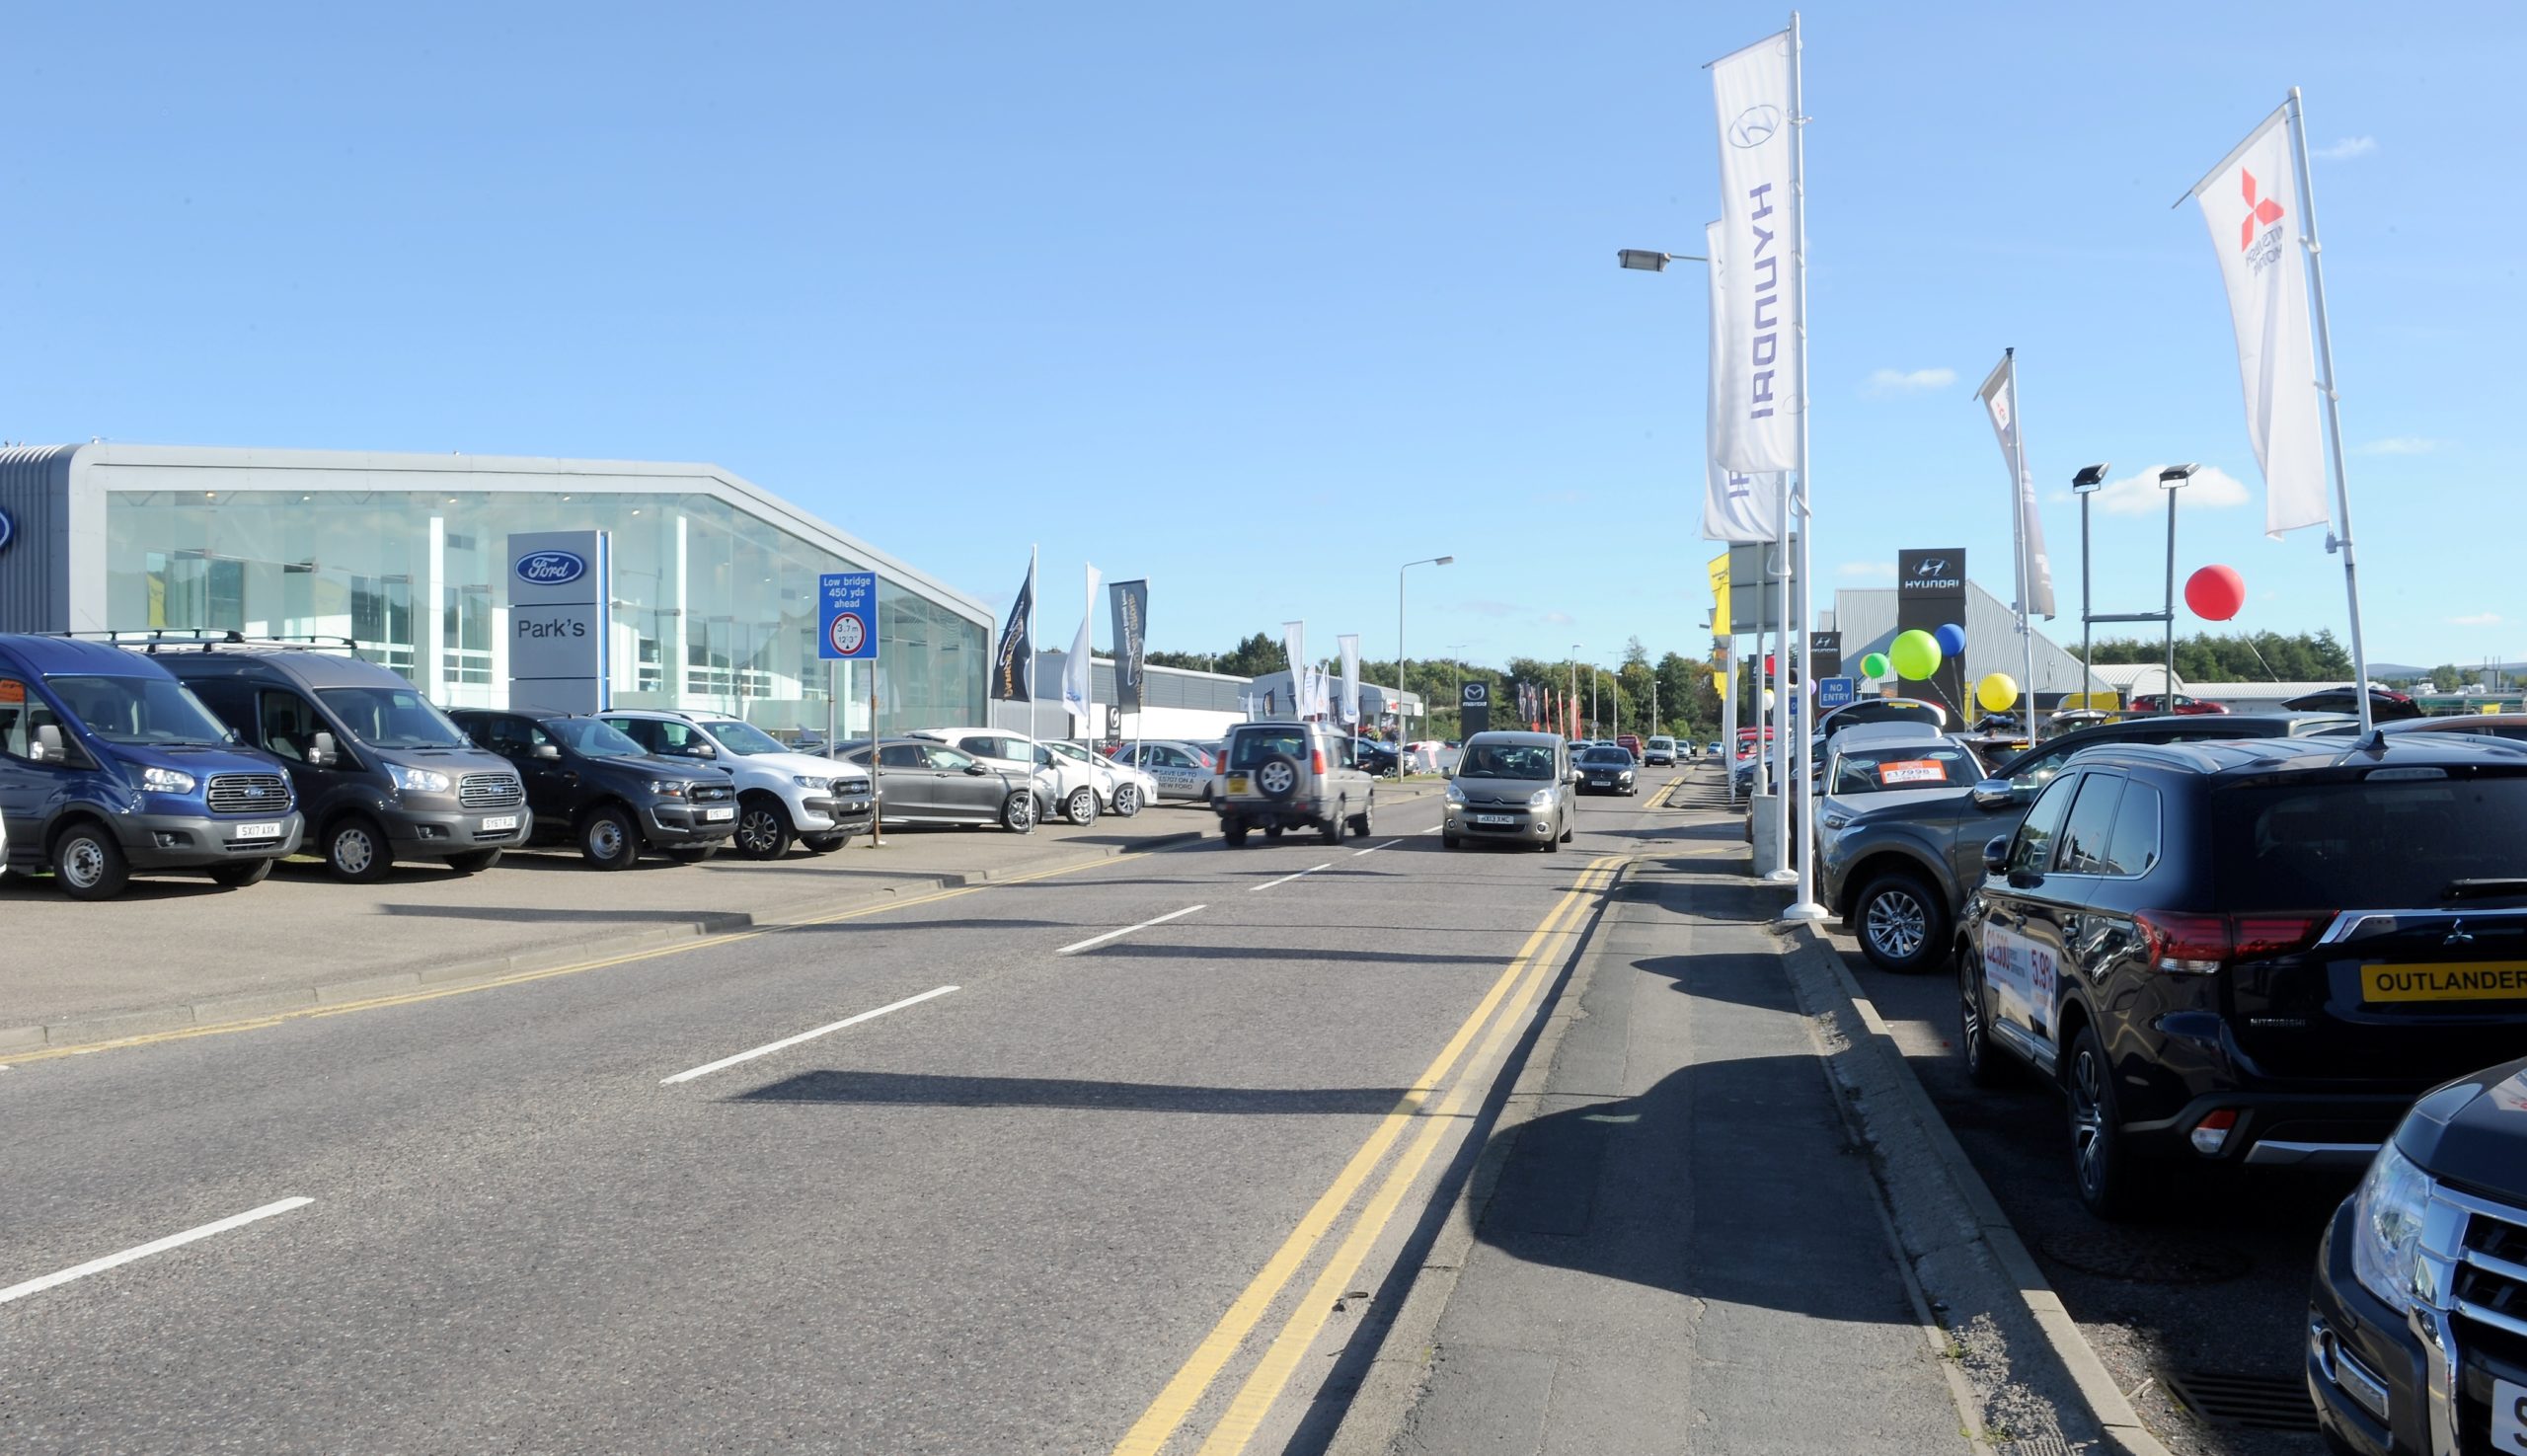 Harbour Road in Inverness is home to many of the city's car dealerships.